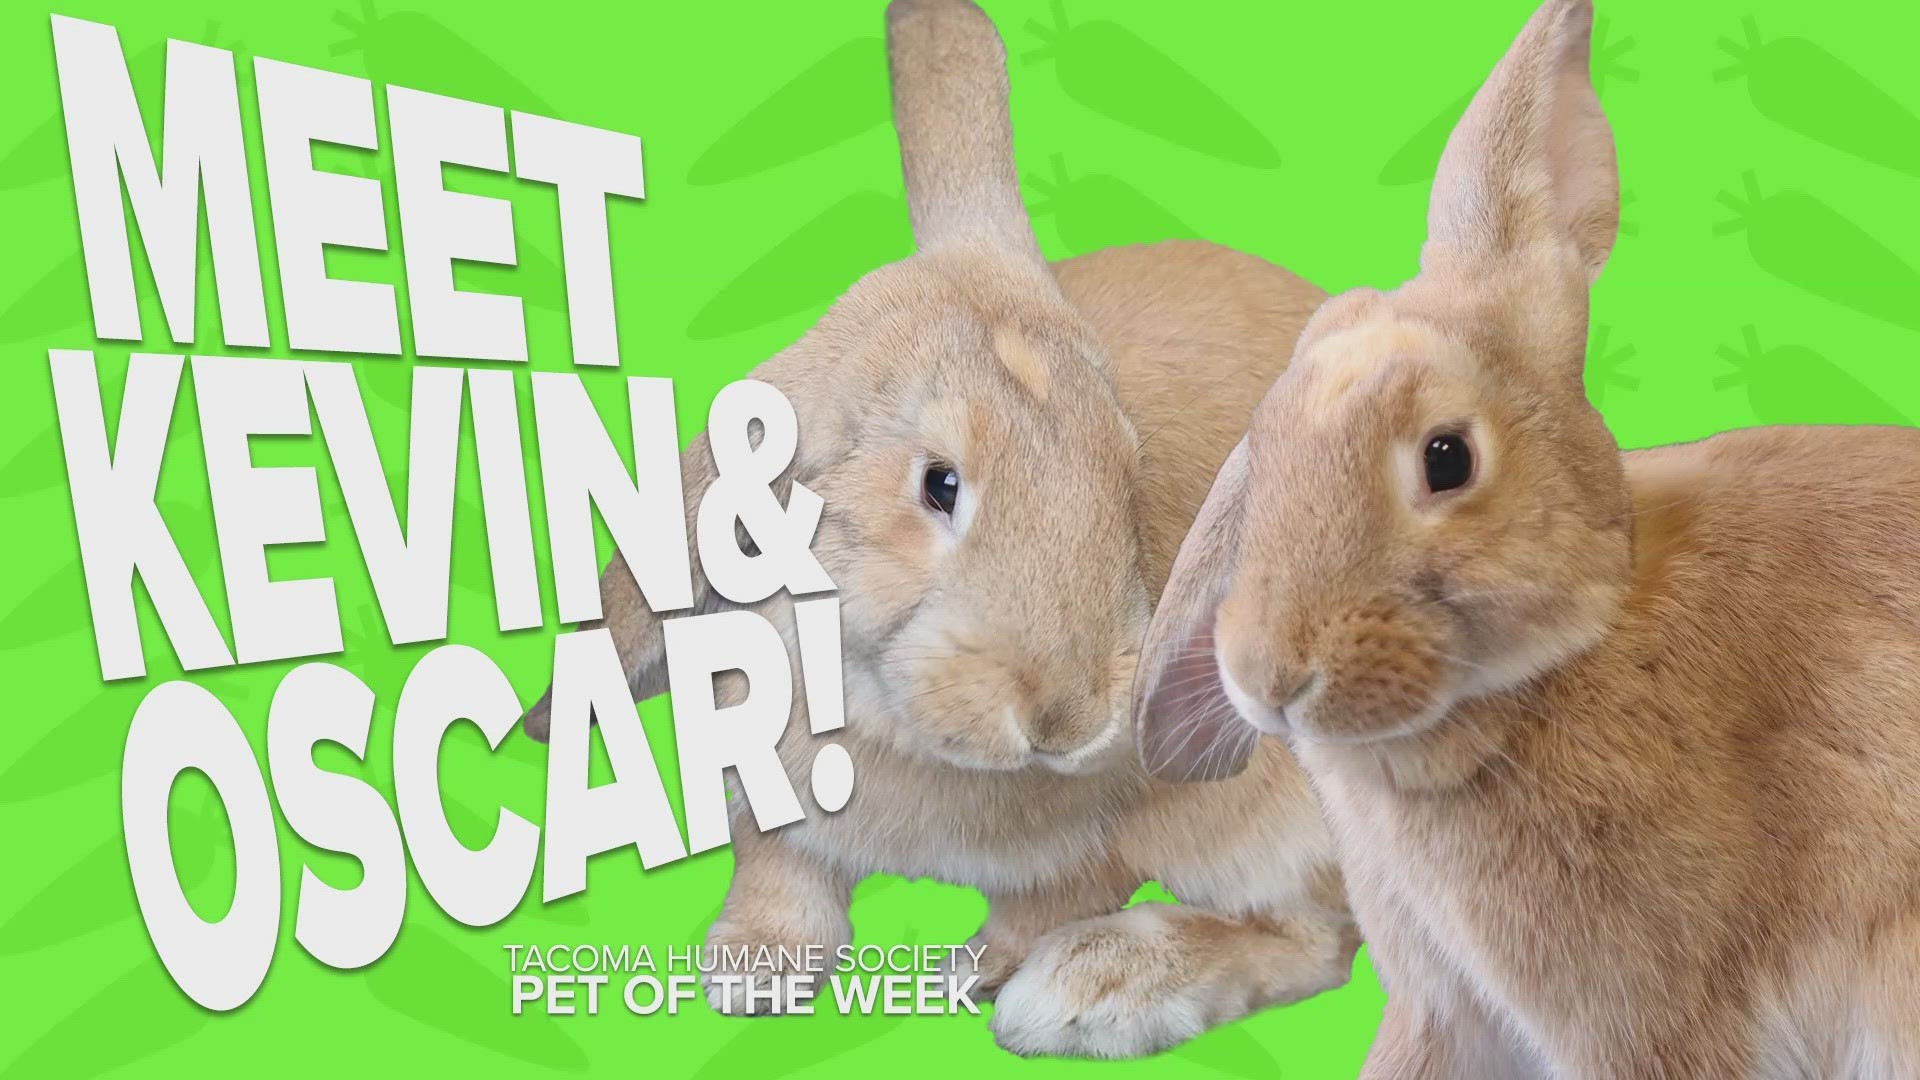 This week's featured rescue pets are Kevin and Oscar